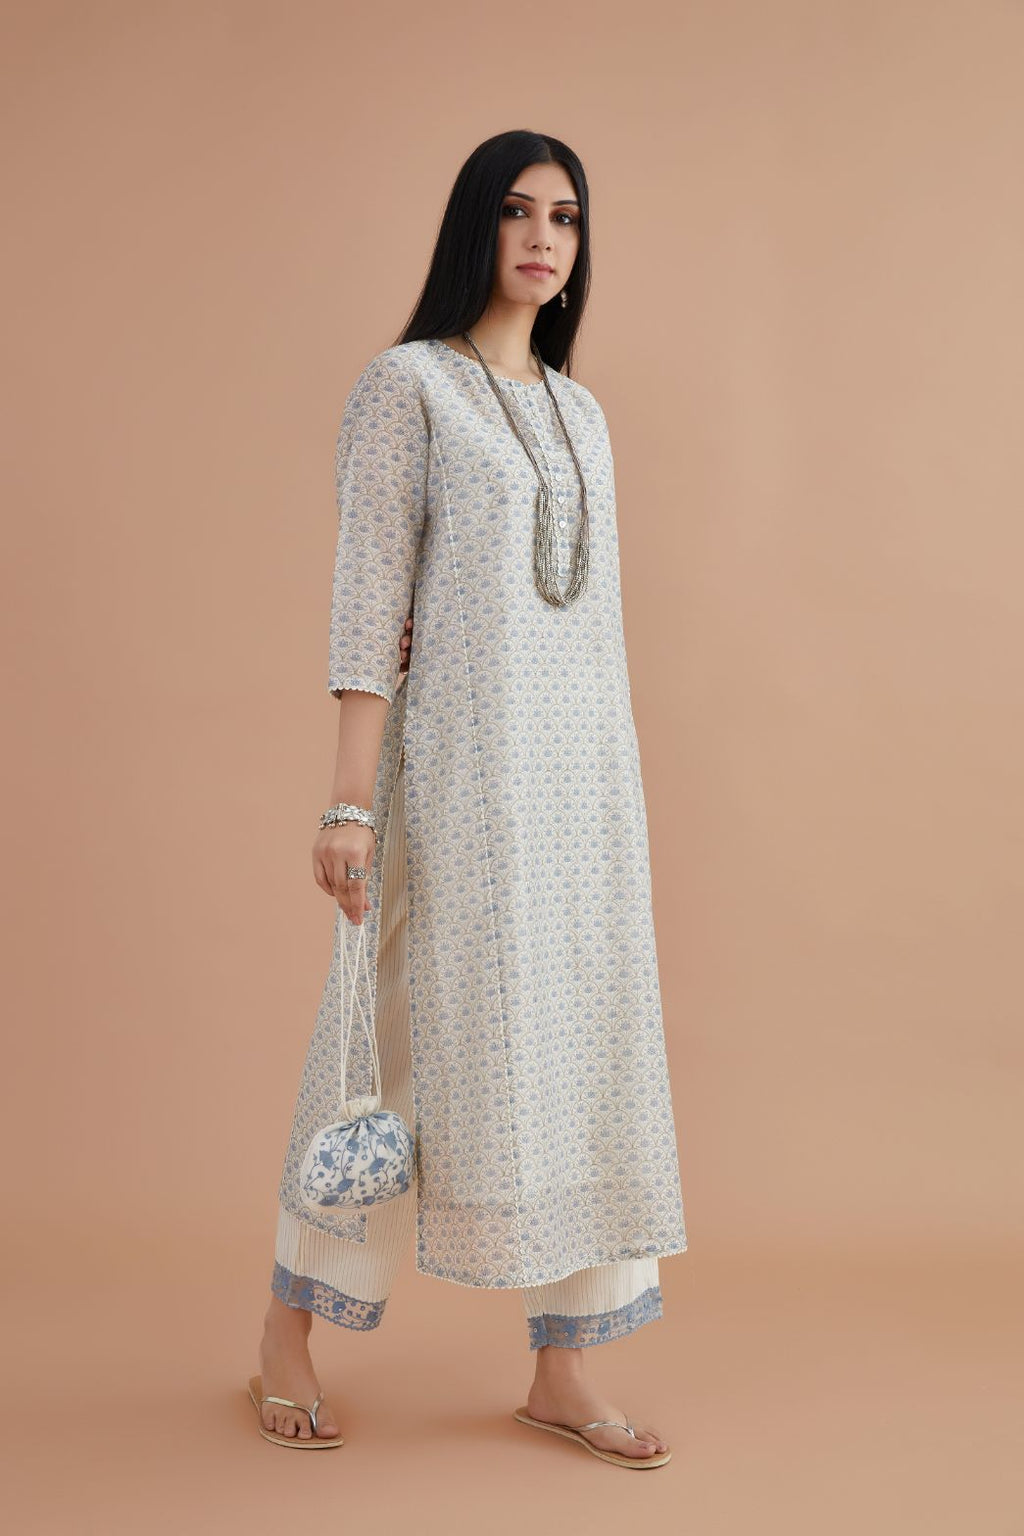 Off white silk chanderi kurta set with all-over jaal hand block print, highlighted with off white rickrack lace